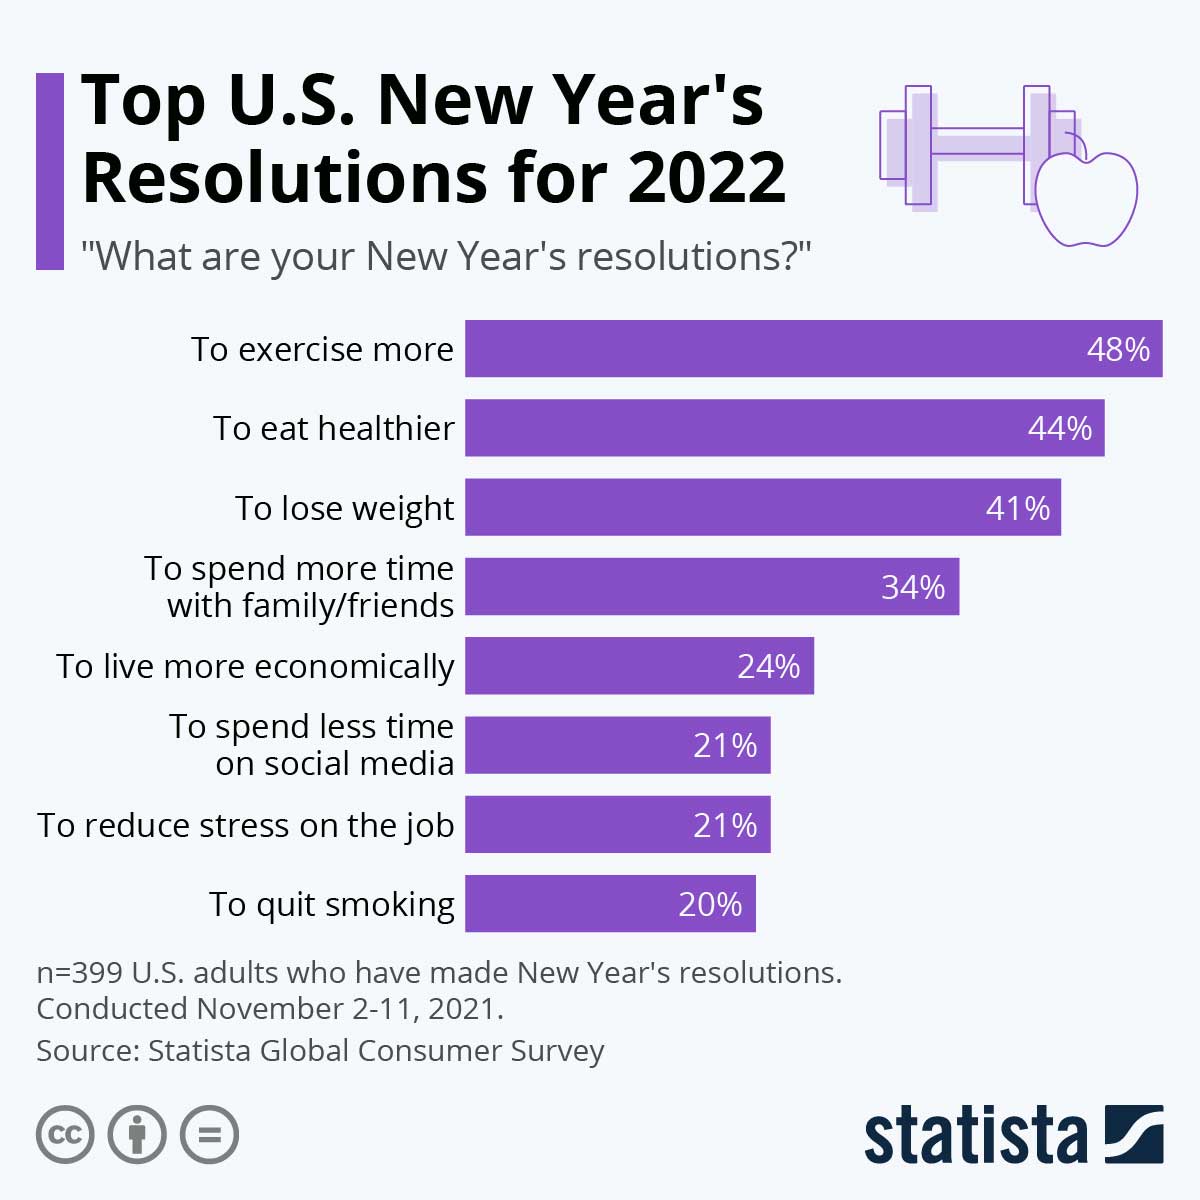 chart of top new year resolutions in 2022.